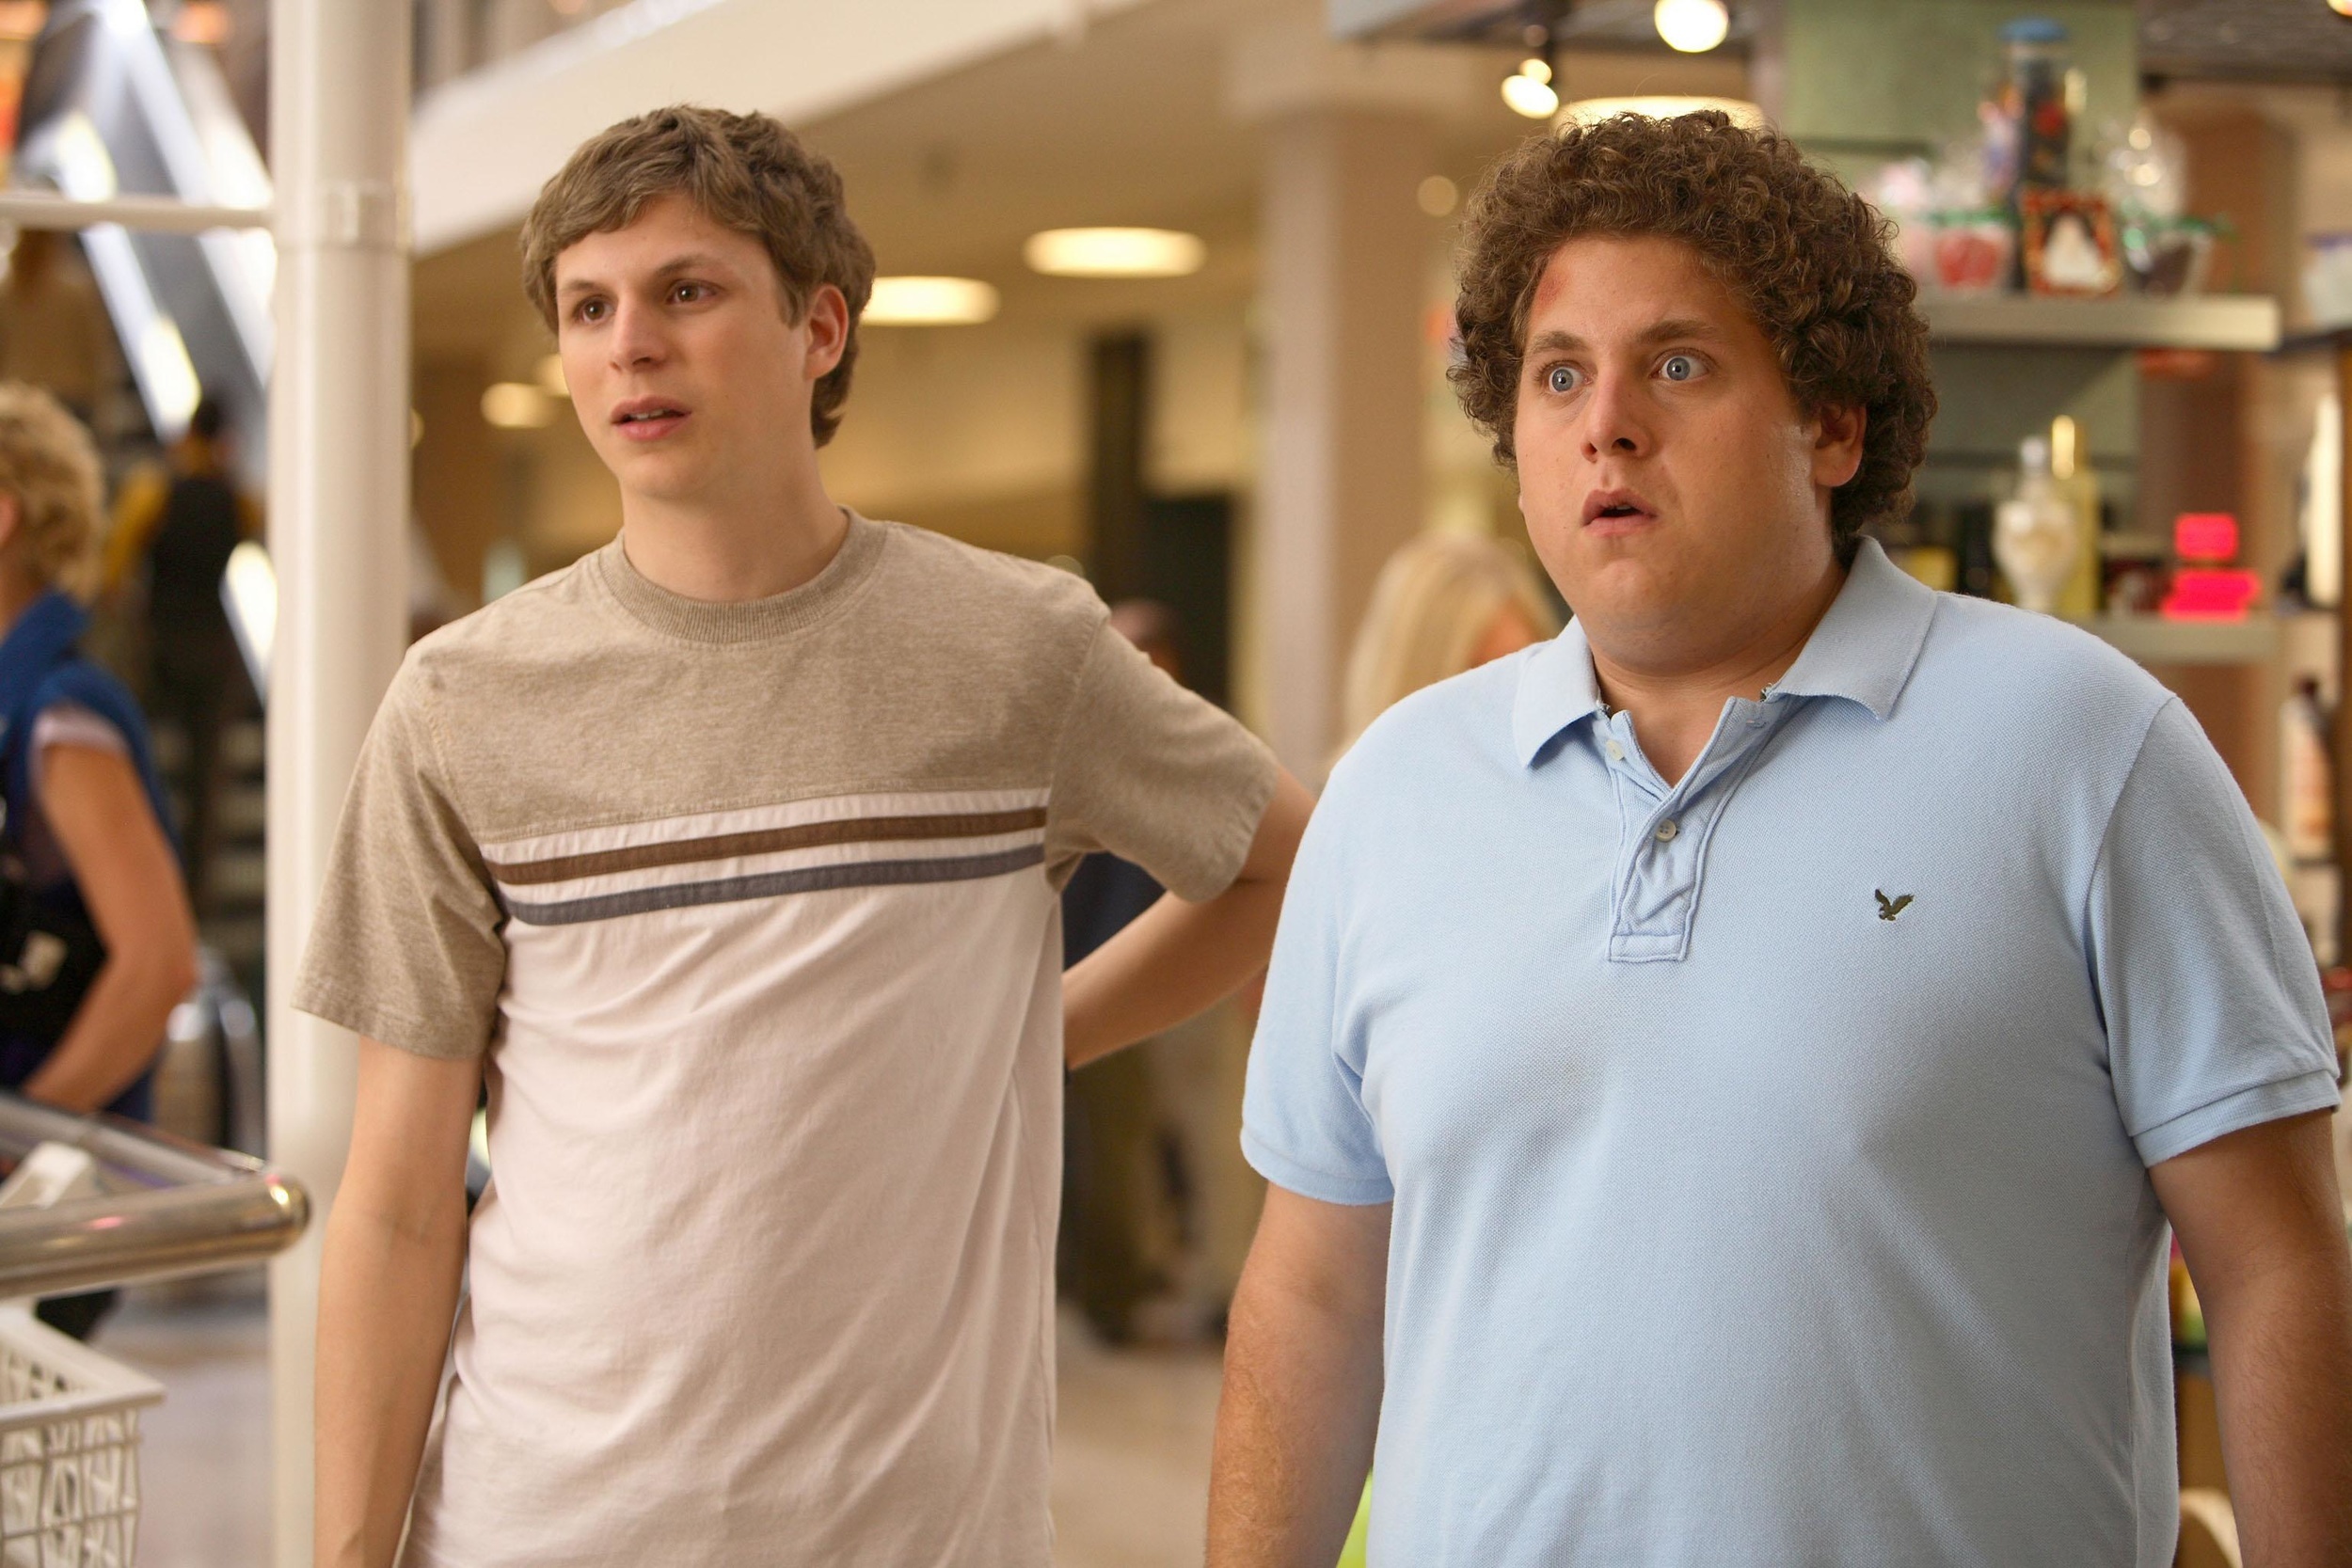 <p>If there's anything we take away from <a href="https://www.youtube.com/watch?v=4eaZ_48ZYog">Evan (Michael Cera) and Seth (Jonah Hill)</a>, it's OK for male friends, even high schoolers, to express how much their friendship means to the other. It's even OK to say they love each other, and not in that raunchy way the boys like to talk (well, mostly Seth) throughout an adventurous and revealing evening before graduation.</p><p><a href='https://www.msn.com/en-us/community/channel/vid-cj9pqbr0vn9in2b6ddcd8sfgpfq6x6utp44fssrv6mc2gtybw0us'>Follow us on MSN to see more of our exclusive entertainment content.</a></p>